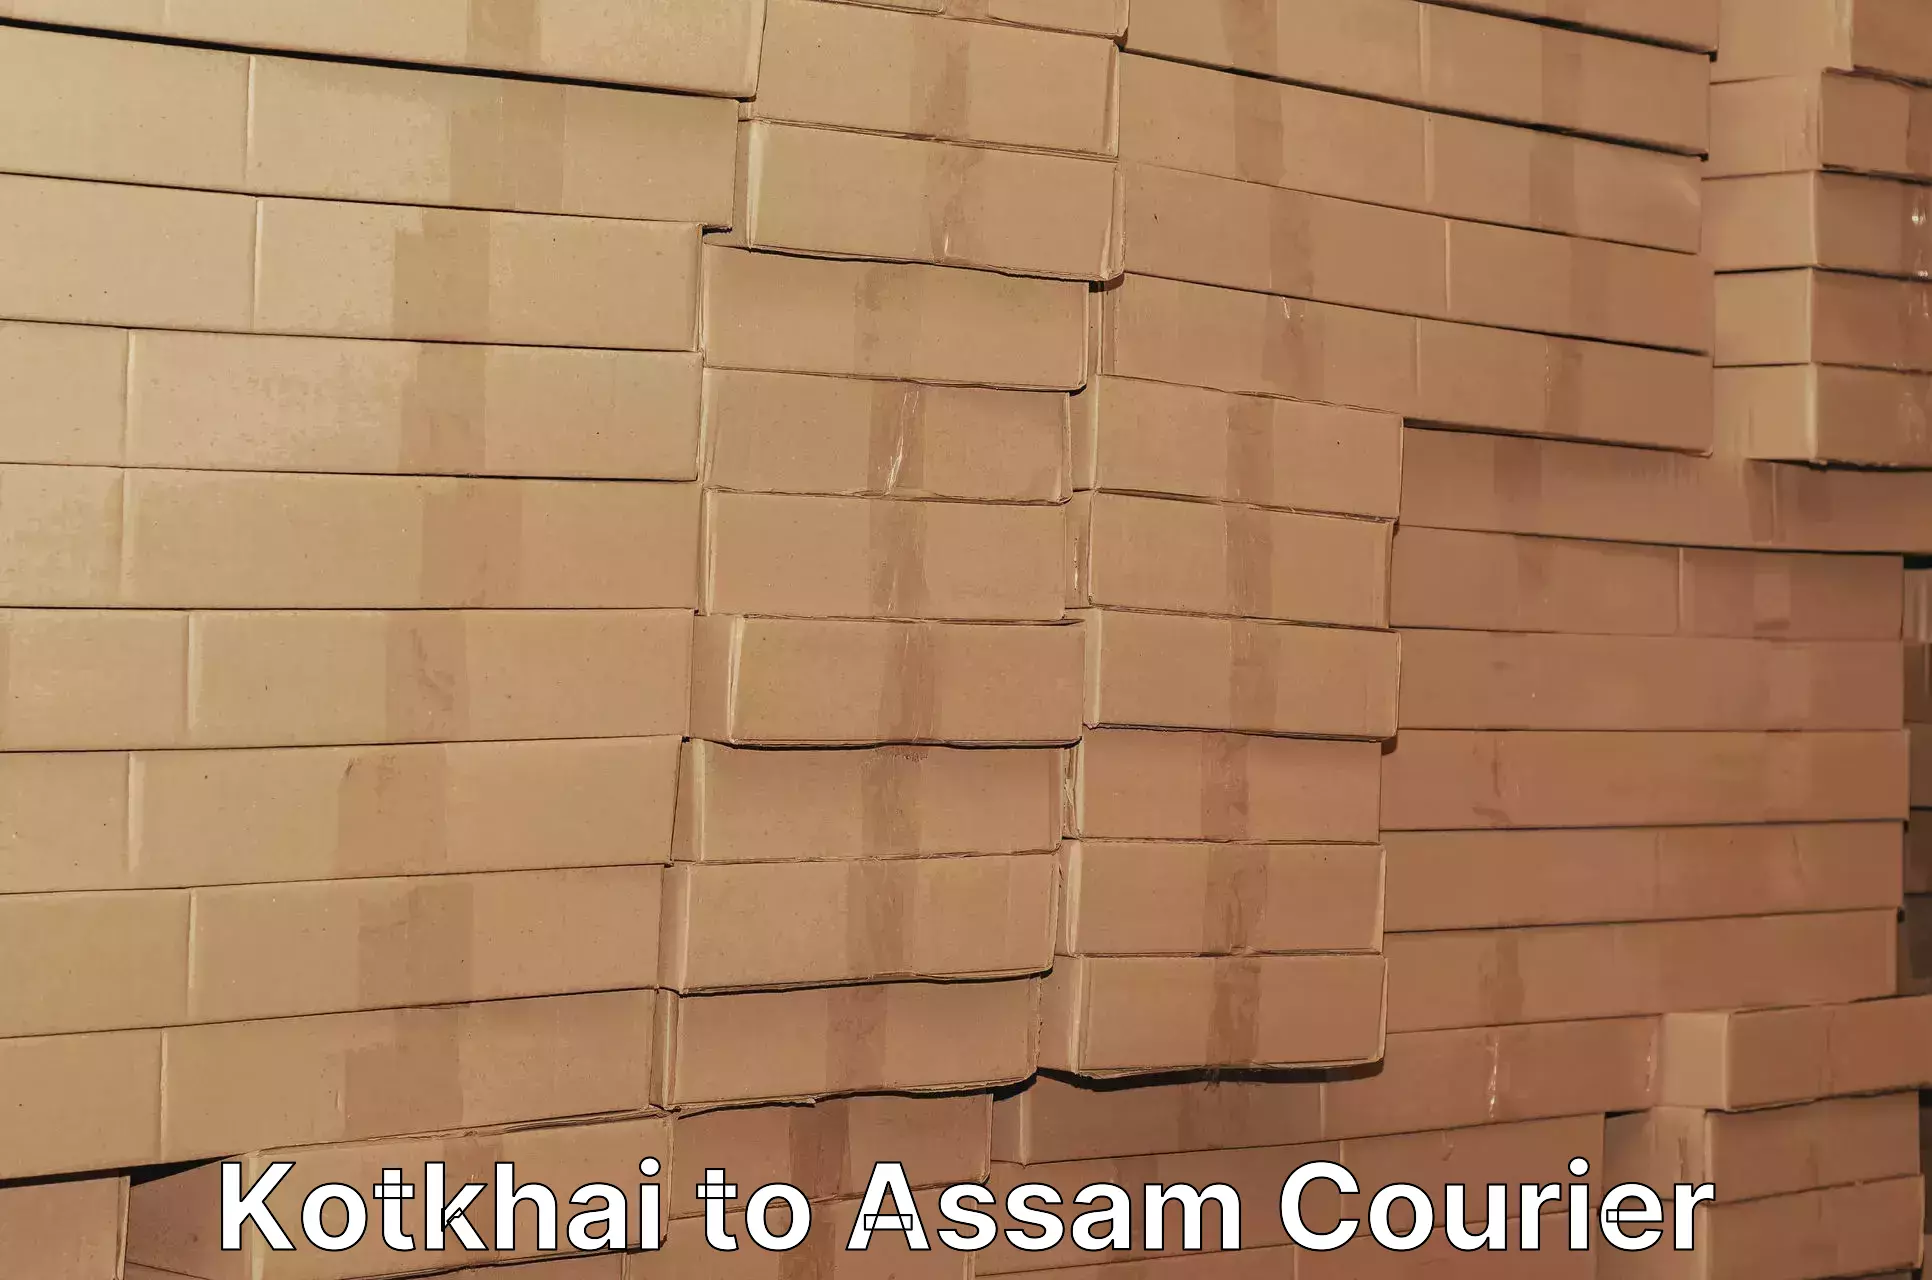 Courier service booking Kotkhai to Jorhat